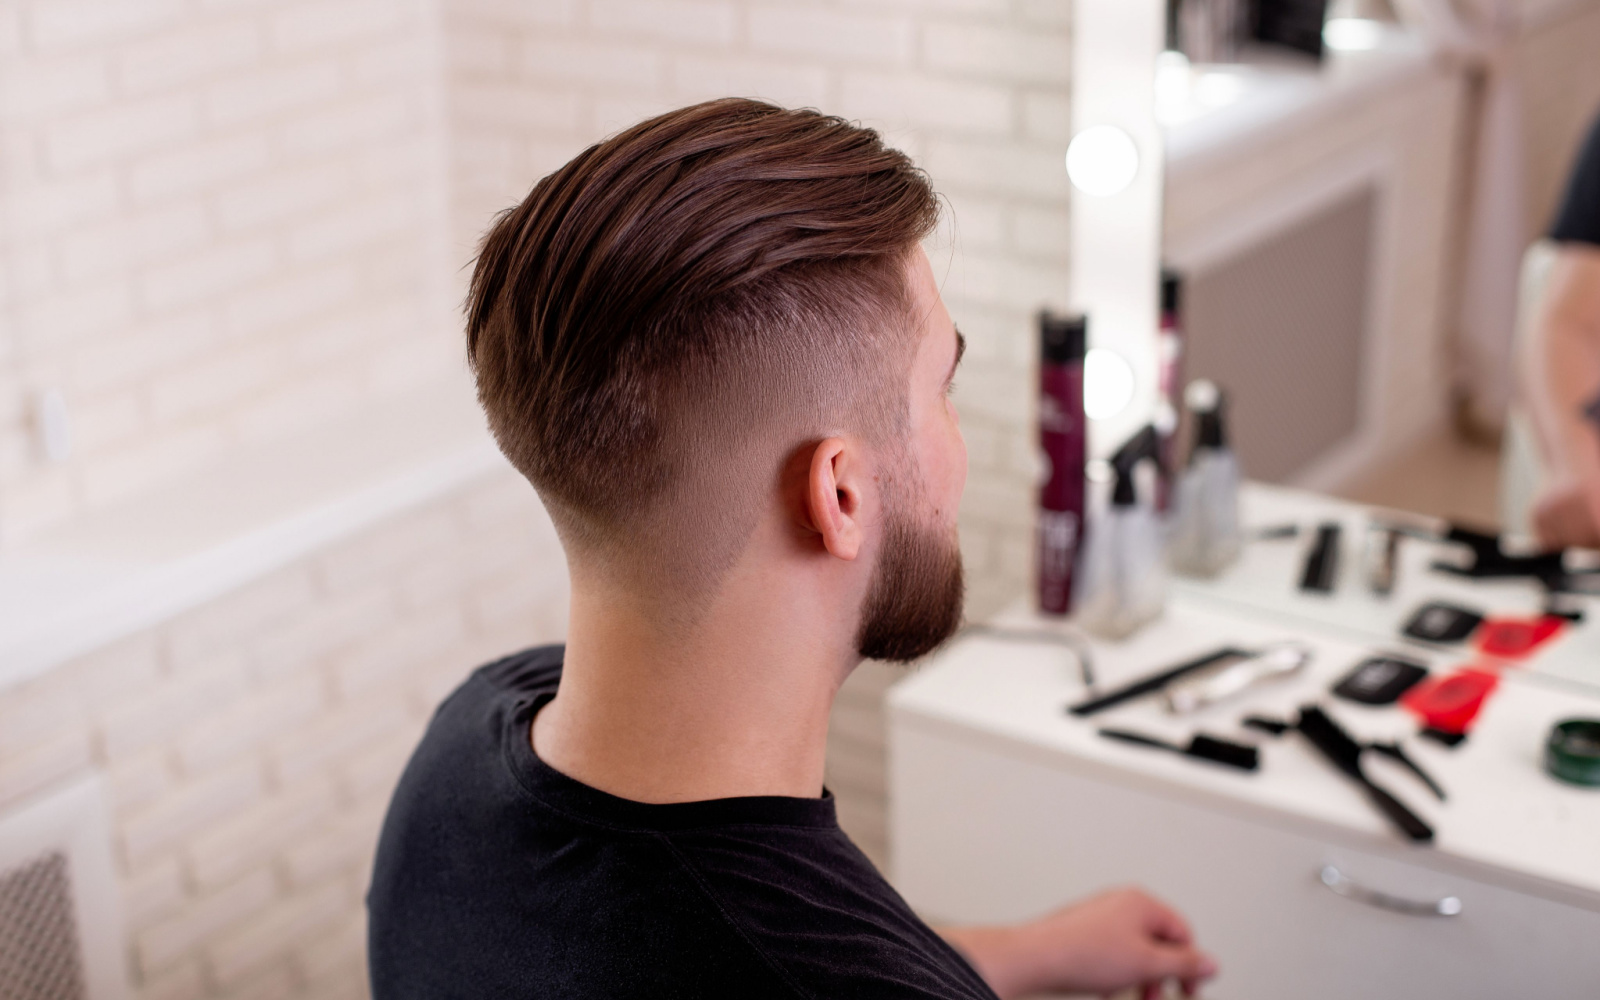 How to Grow Out an Undercut | Guide for Both Guys & Gals